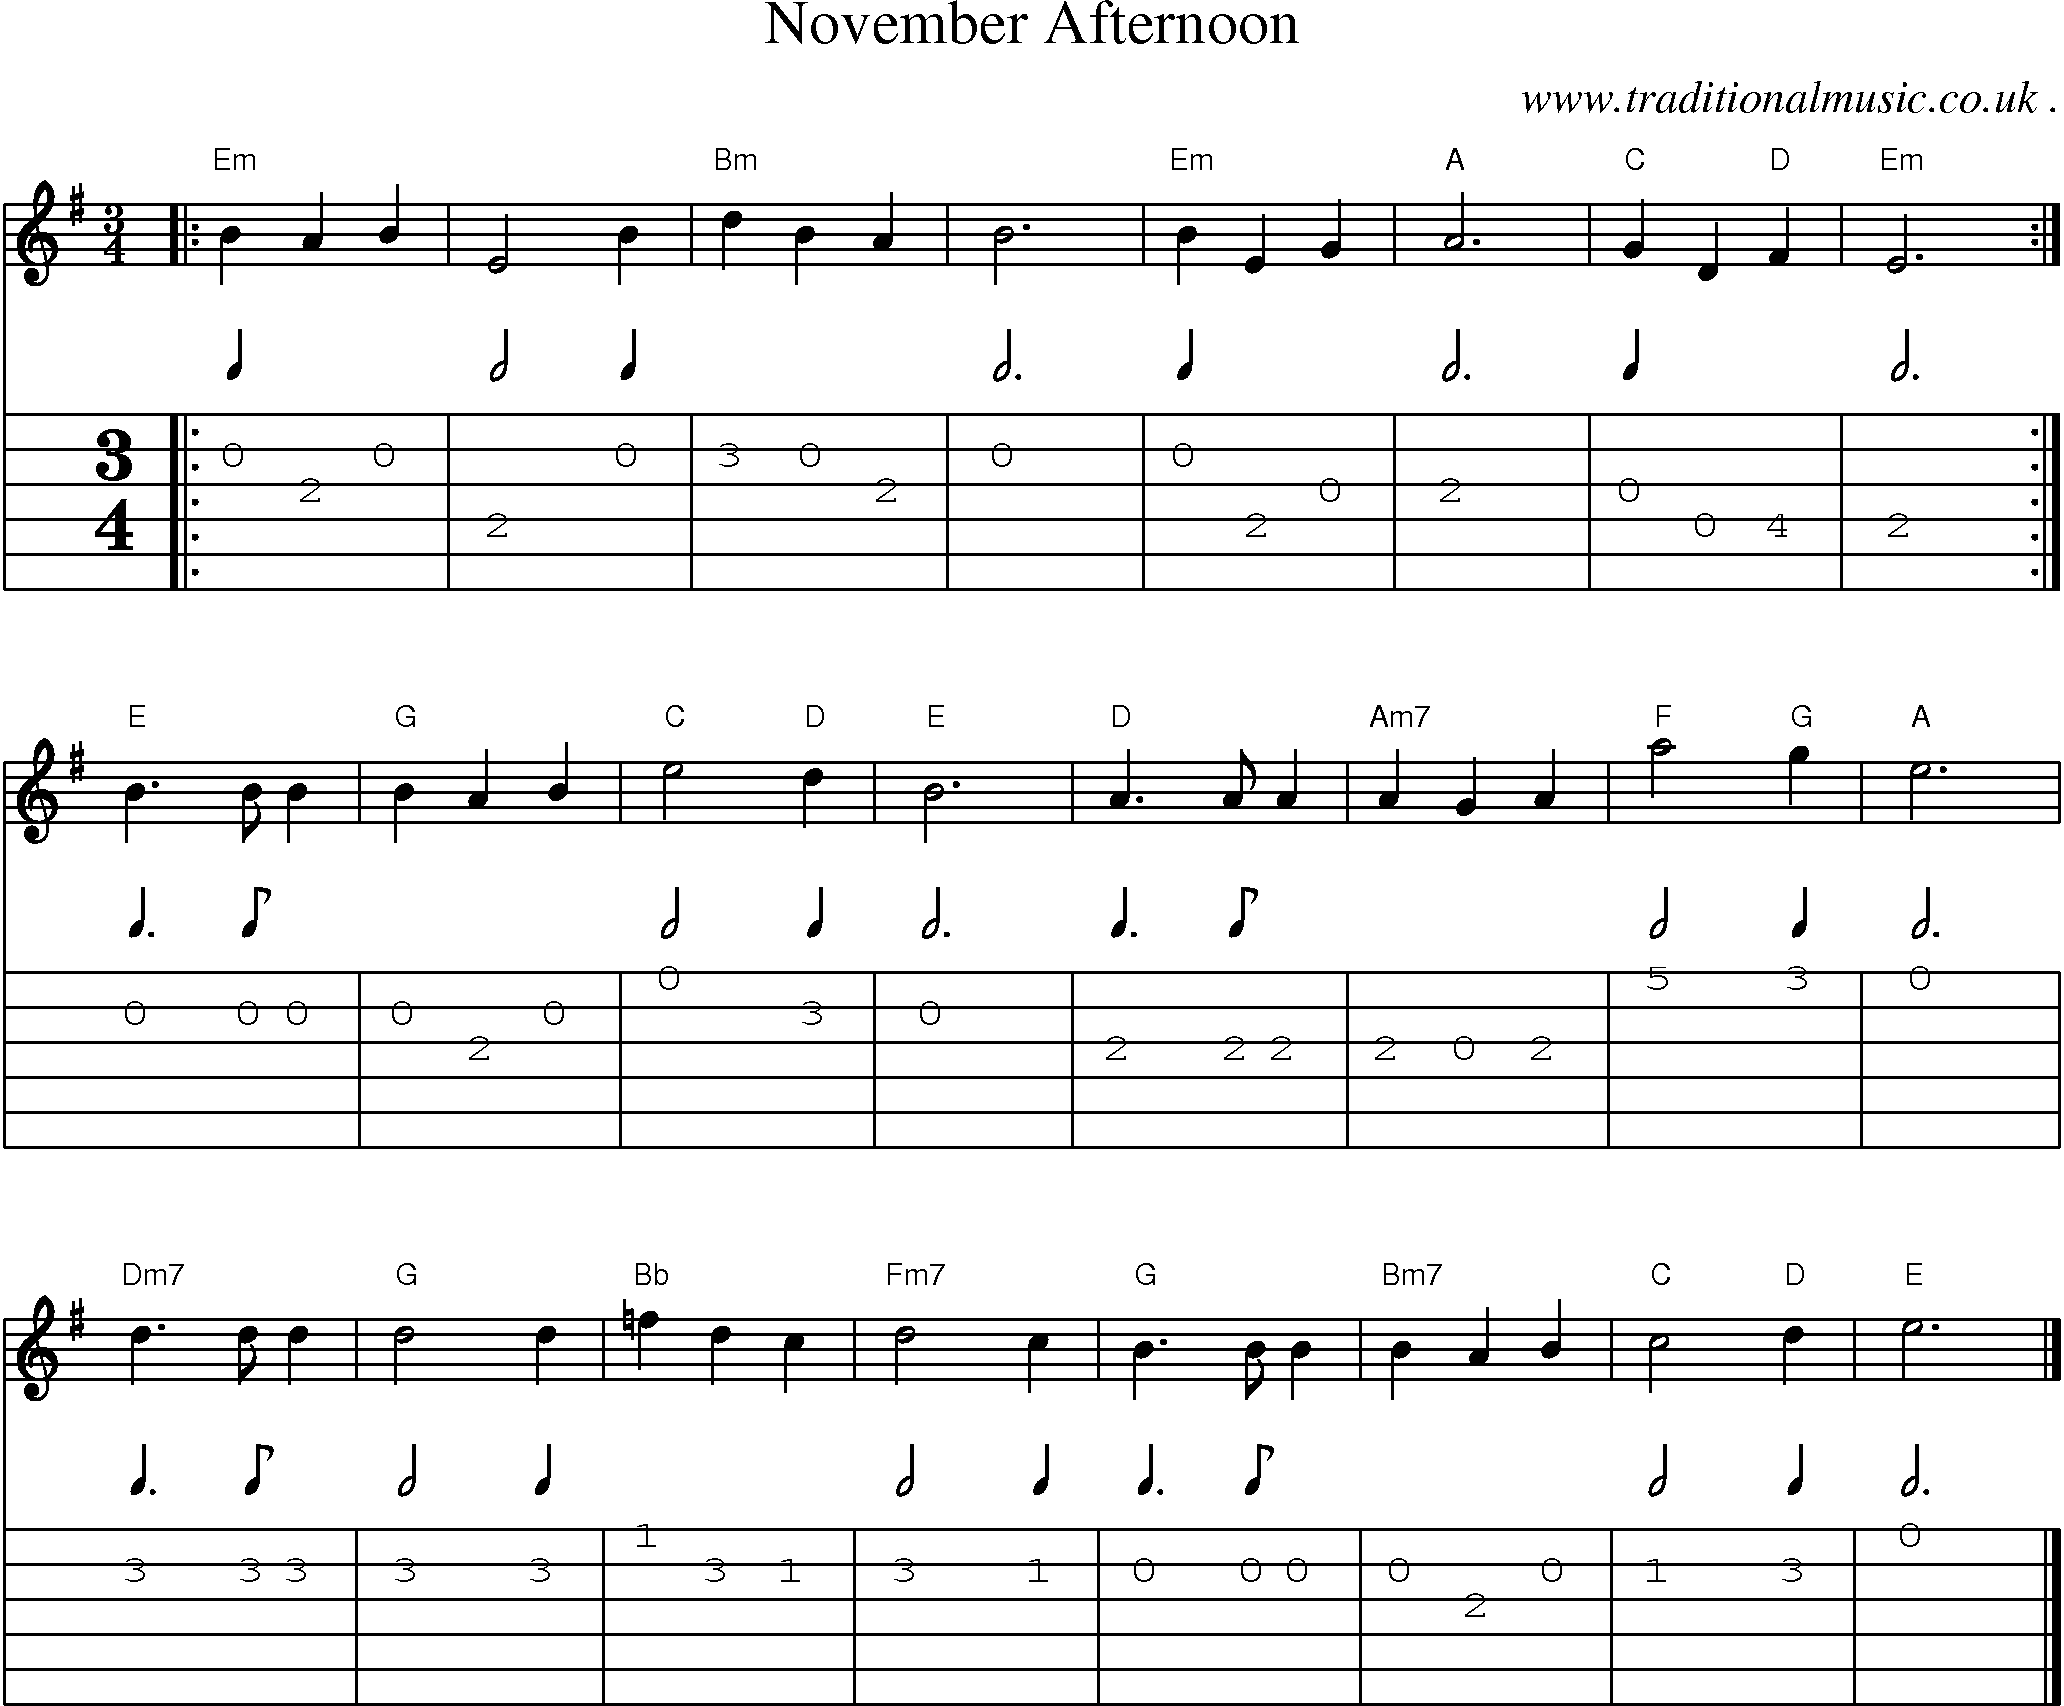 Music Score and Guitar Tabs for November Afternoon